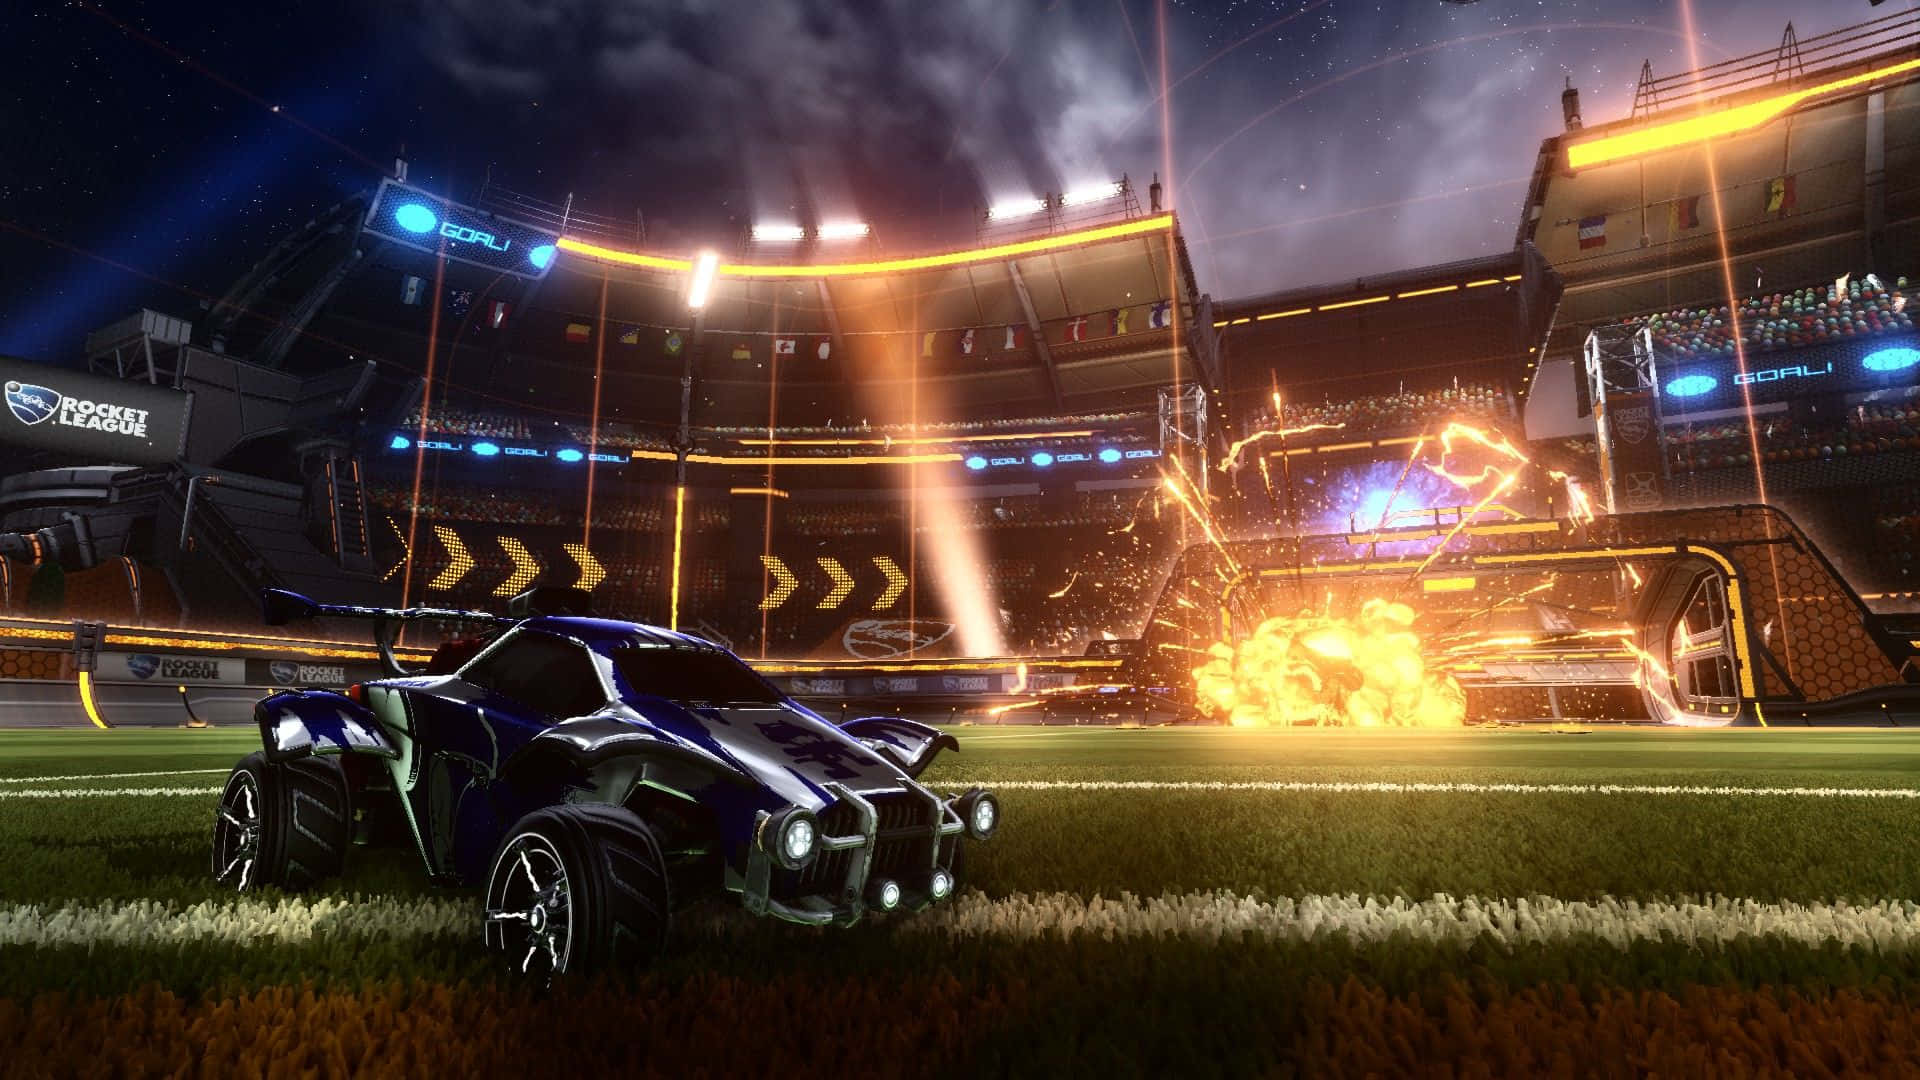 Intense Gaming Action with 720p Rocket League Background